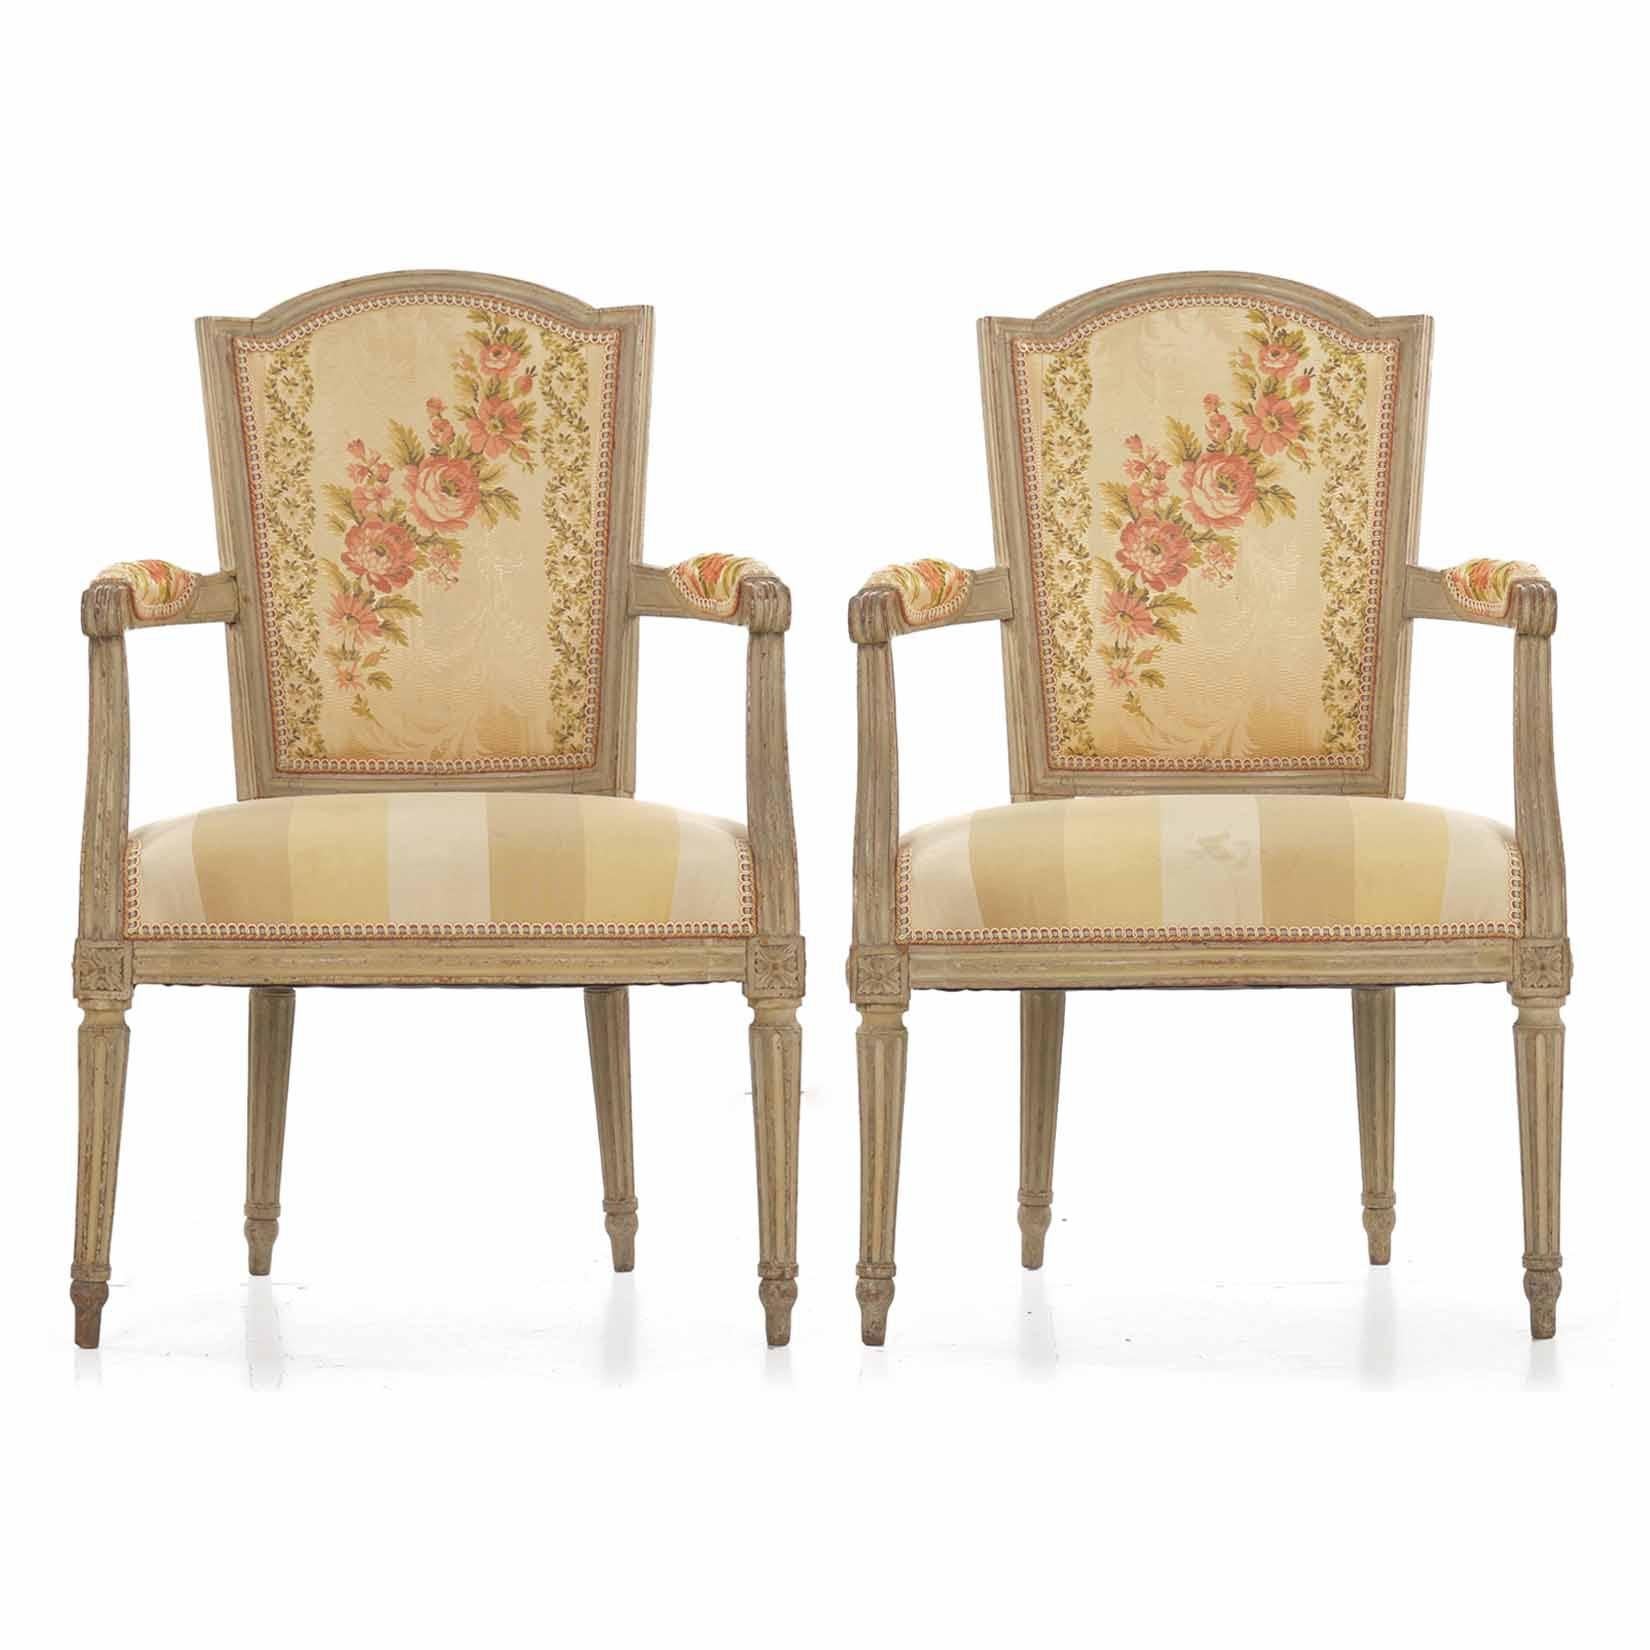 A fine pair of neoclassical beechwood fauteuils in early gray paint, they feature a trapezoidal chair back with an arched crest with double-pegged Tenon-mortised corners, open arms both upholstered with reeded handholds over cyma curved arm